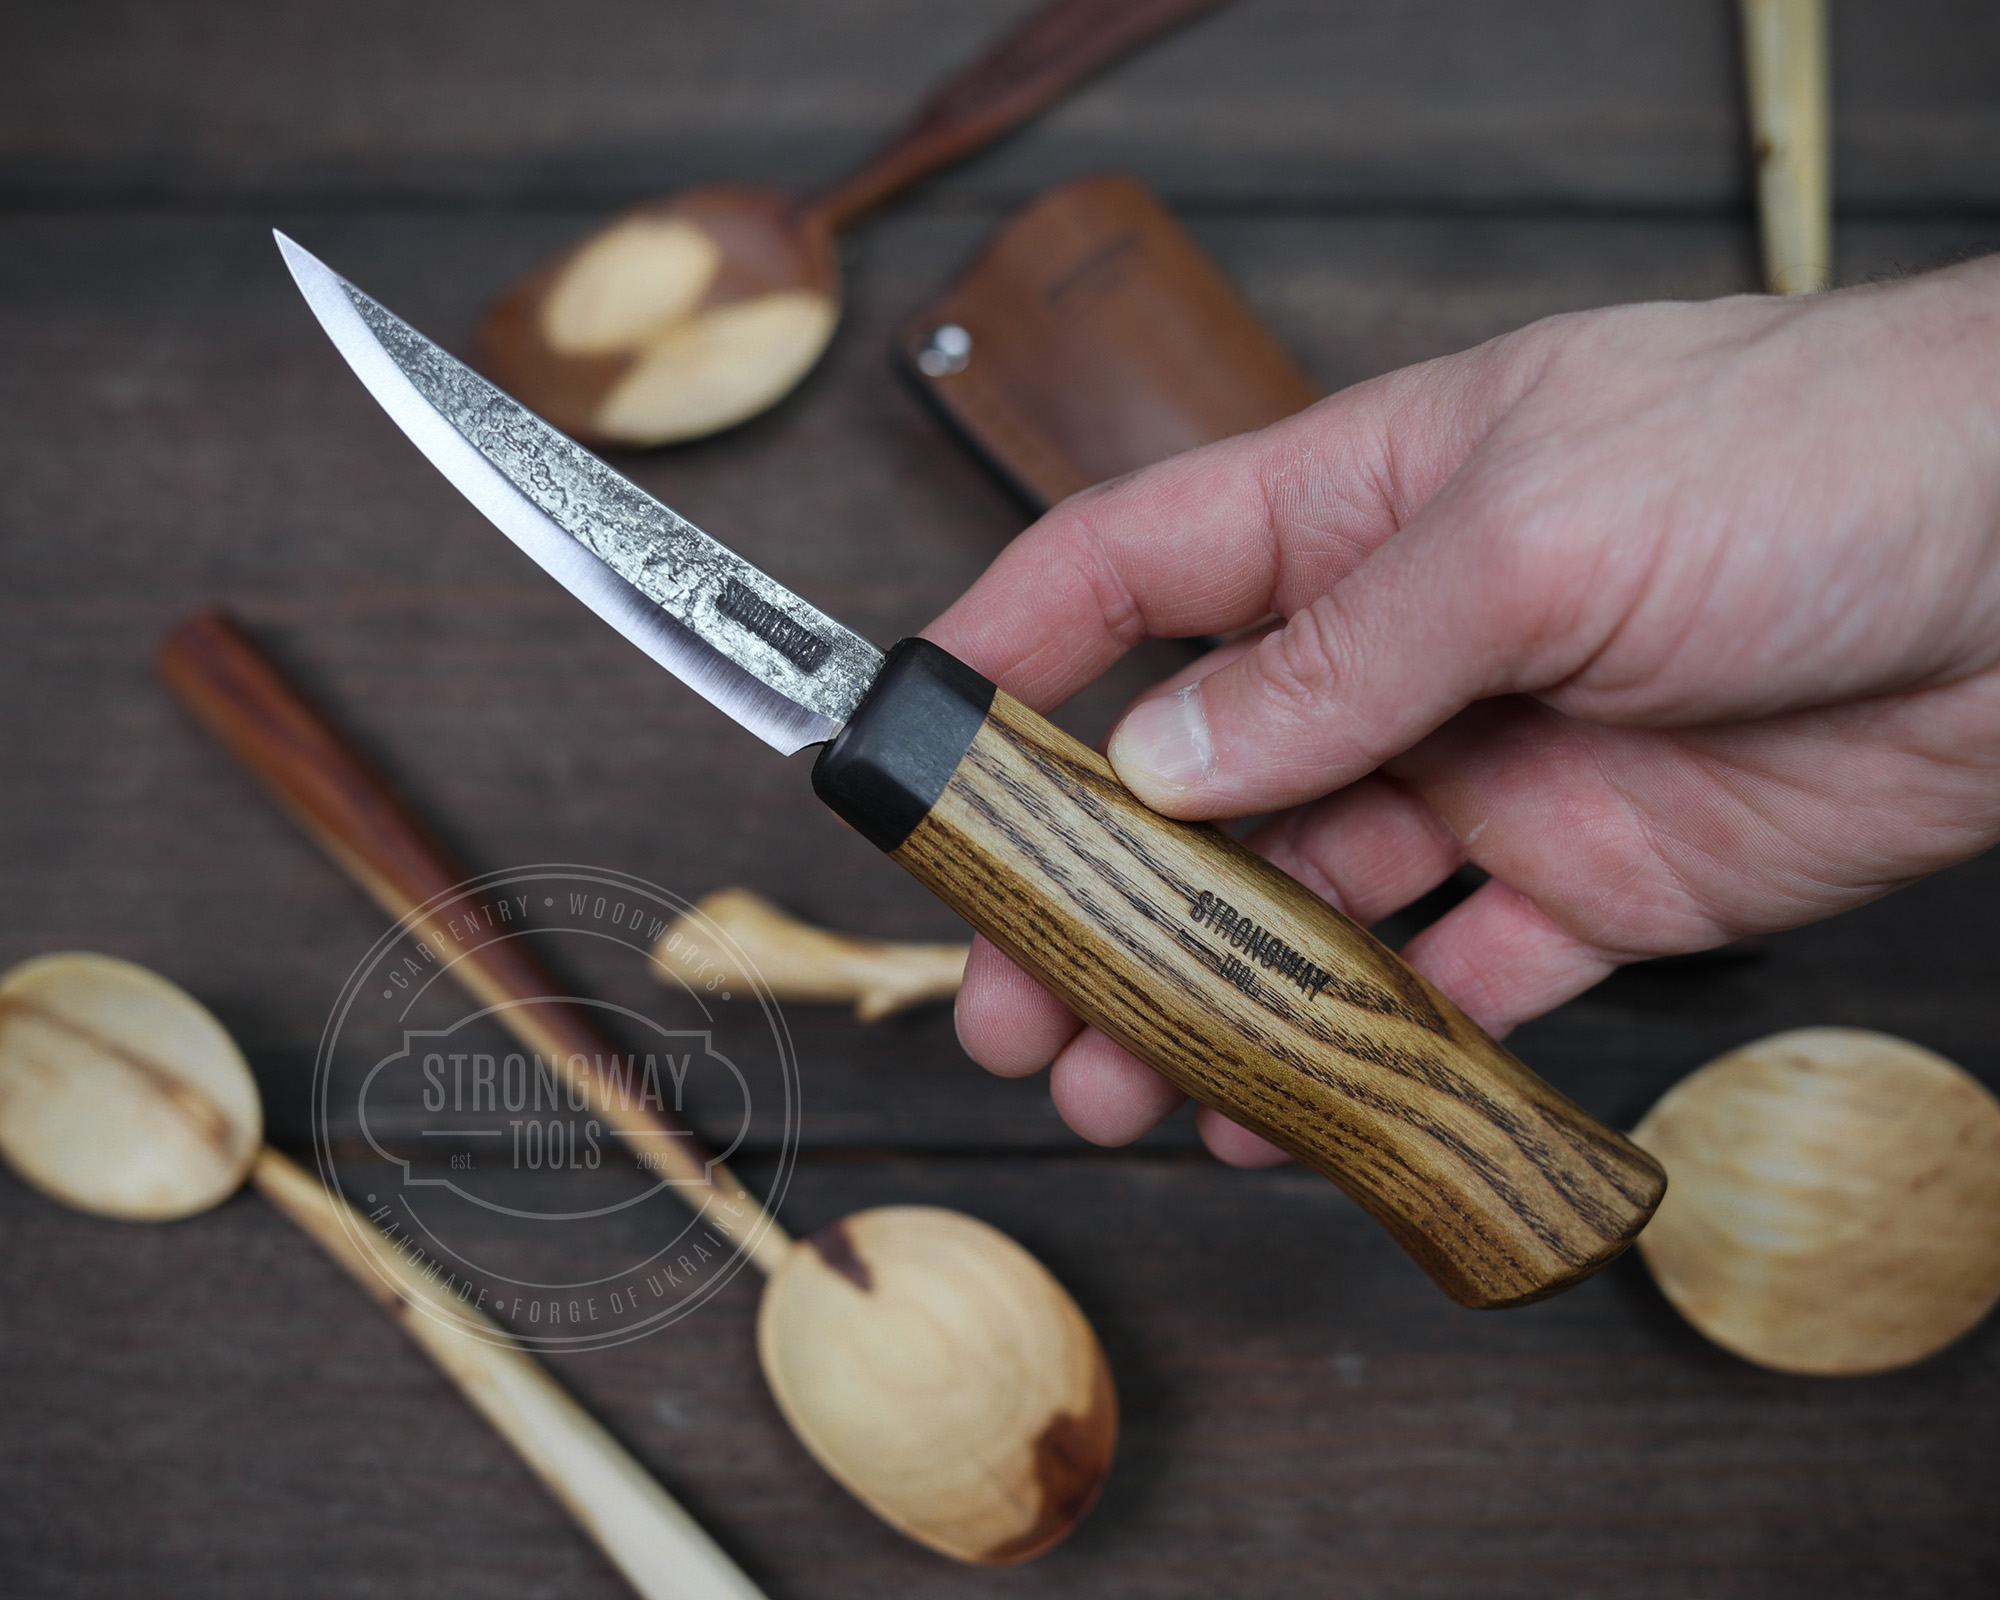 Wood Carving knife with thermo ash wood handle > STRONGWAY TOOLS